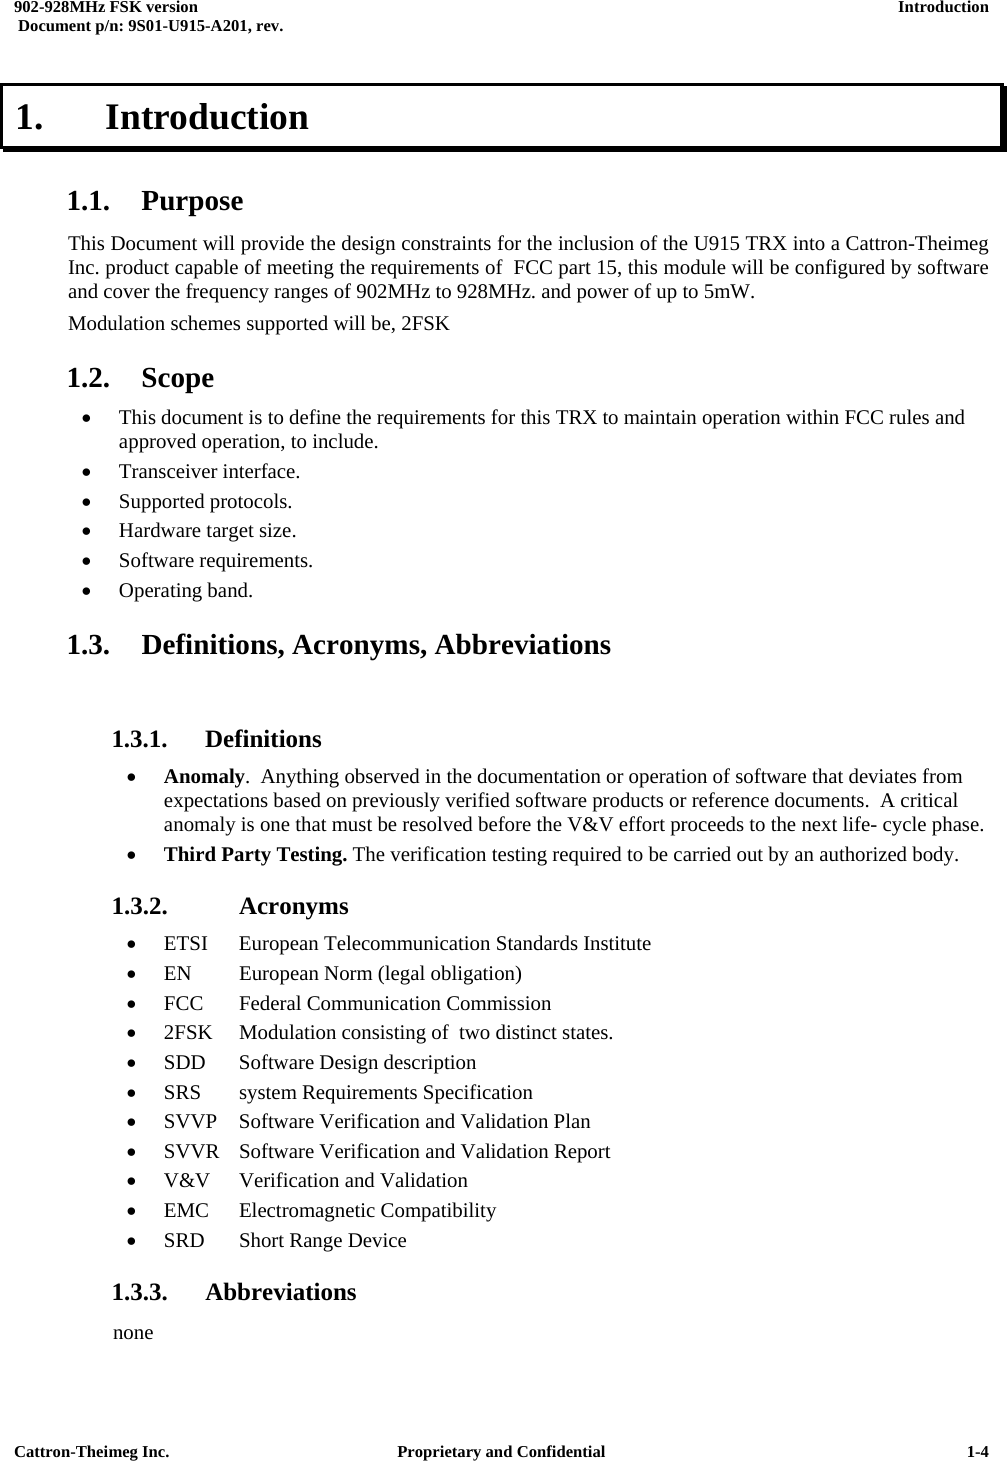  902-928MHz FSK version      Introduction   Document p/n: 9S01-U915-A201, rev.   Cattron-Theimeg Inc.  Proprietary and Confidential   1-41.   Introduction  1.1. Purpose This Document will provide the design constraints for the inclusion of the U915 TRX into a Cattron-Theimeg Inc. product capable of meeting the requirements of  FCC part 15, this module will be configured by software and cover the frequency ranges of 902MHz to 928MHz. and power of up to 5mW.  Modulation schemes supported will be, 2FSK  1.2. Scope •  This document is to define the requirements for this TRX to maintain operation within FCC rules and approved operation, to include. •  Transceiver interface. •  Supported protocols. •  Hardware target size.  •  Software requirements.  •  Operating band.  1.3.  Definitions, Acronyms, Abbreviations  1.3.1. Definitions •  Anomaly.  Anything observed in the documentation or operation of software that deviates from expectations based on previously verified software products or reference documents.  A critical anomaly is one that must be resolved before the V&amp;V effort proceeds to the next life- cycle phase. •  Third Party Testing. The verification testing required to be carried out by an authorized body.  1.3.2.  Acronyms •  ETSI  European Telecommunication Standards Institute •  EN  European Norm (legal obligation) •  FCC  Federal Communication Commission •  2FSK  Modulation consisting of  two distinct states. •  SDD  Software Design description •  SRS  system Requirements Specification •  SVVP Software Verification and Validation Plan •  SVVR  Software Verification and Validation Report •  V&amp;V Verification and Validation •  EMC Electromagnetic Compatibility •  SRD  Short Range Device 1.3.3. Abbreviations none 